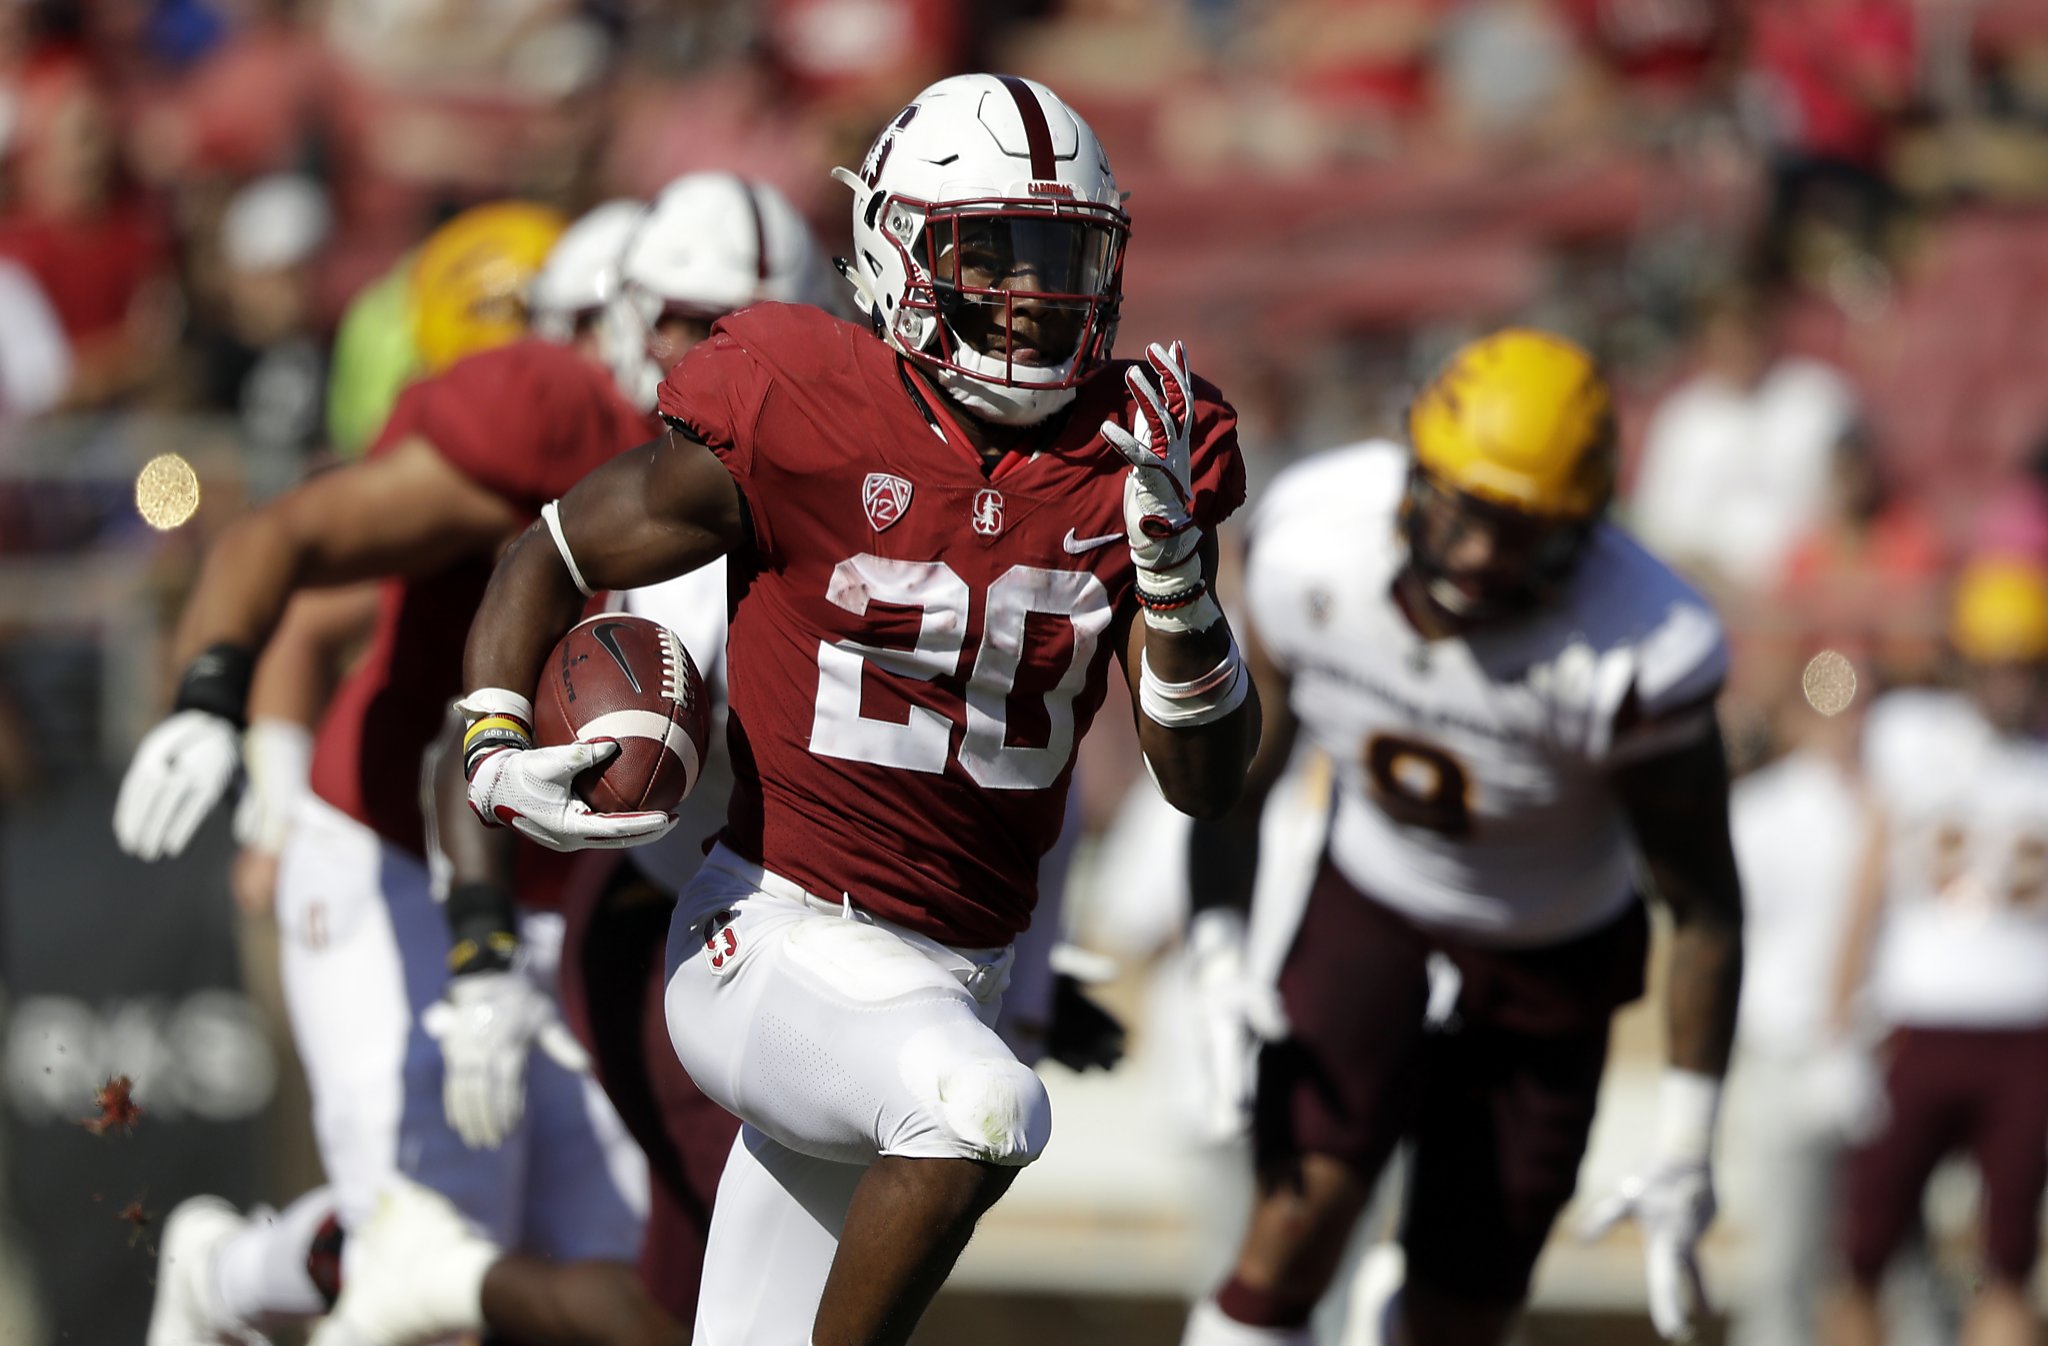 Alamo Bowl: A big game by Bryce Love could lead to him leaving Stanford early